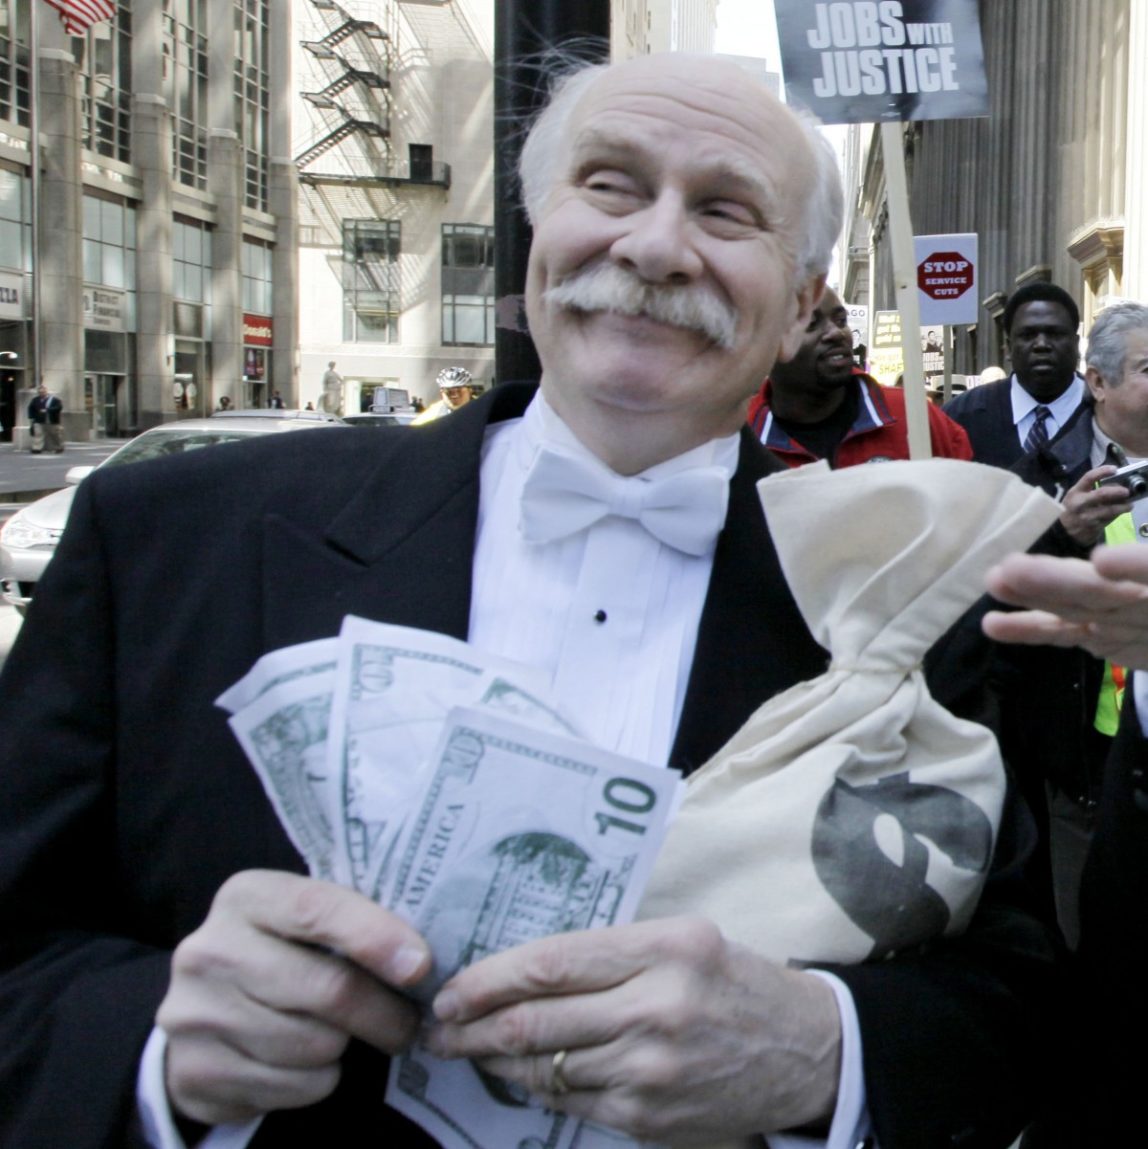 Protesters Richard Hanzel, left, Brendan Hutt, and Richard Shavzin, right, of the Screen Actors Guild, dressed as wall street bankers, march from Goldman Sachs' office to a rally in Federal Plaza demanding Wall Street reform, Wednesday, April 28, 2010, in Chicago. (AP Photo/M. Spencer Green)